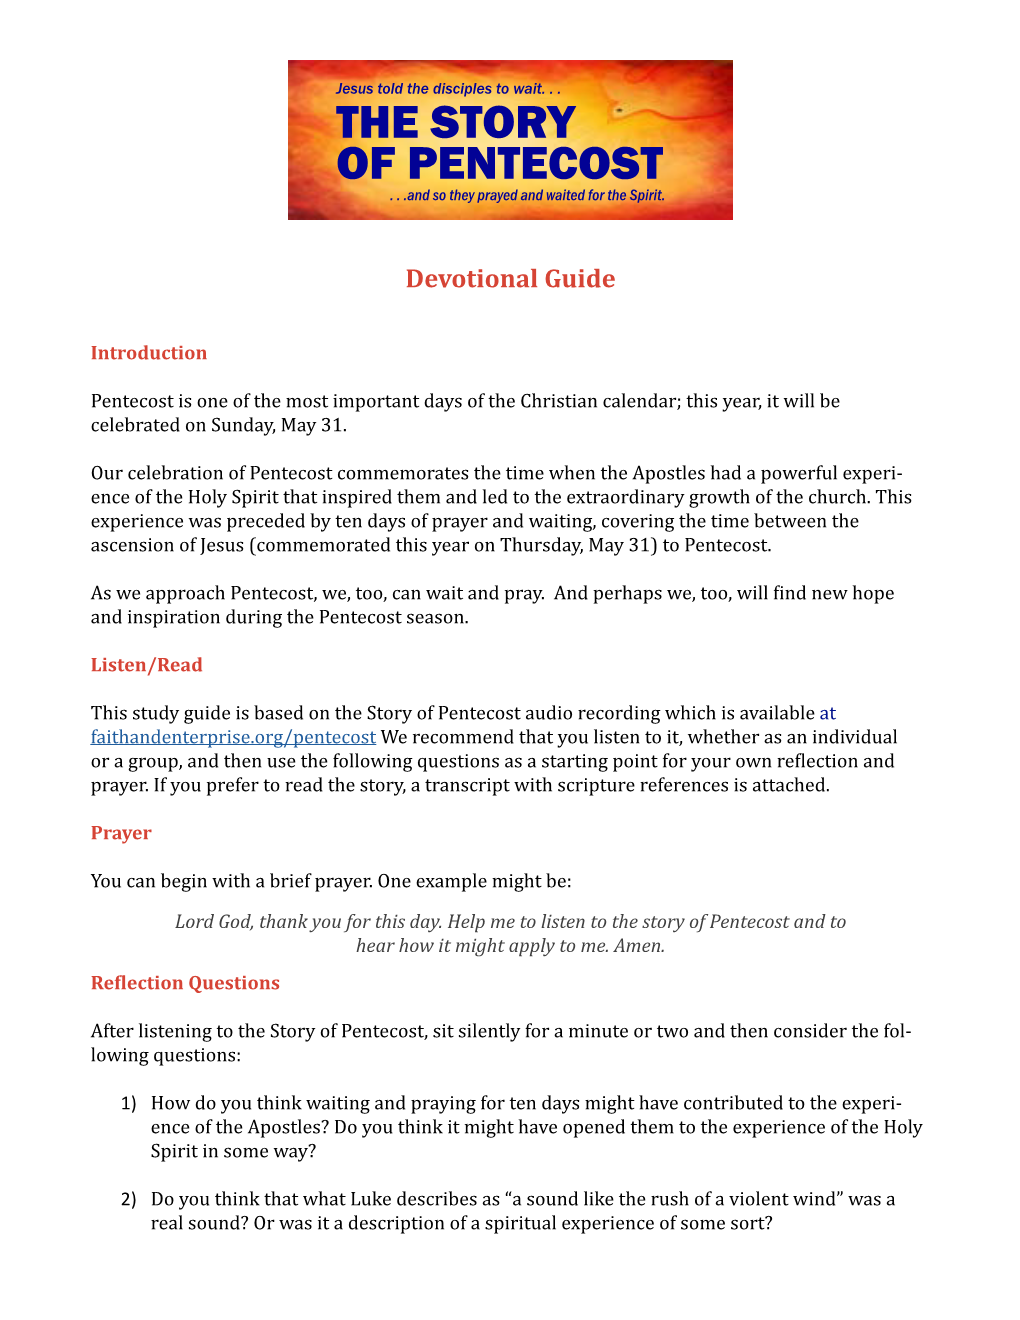 The Story of Pentecost